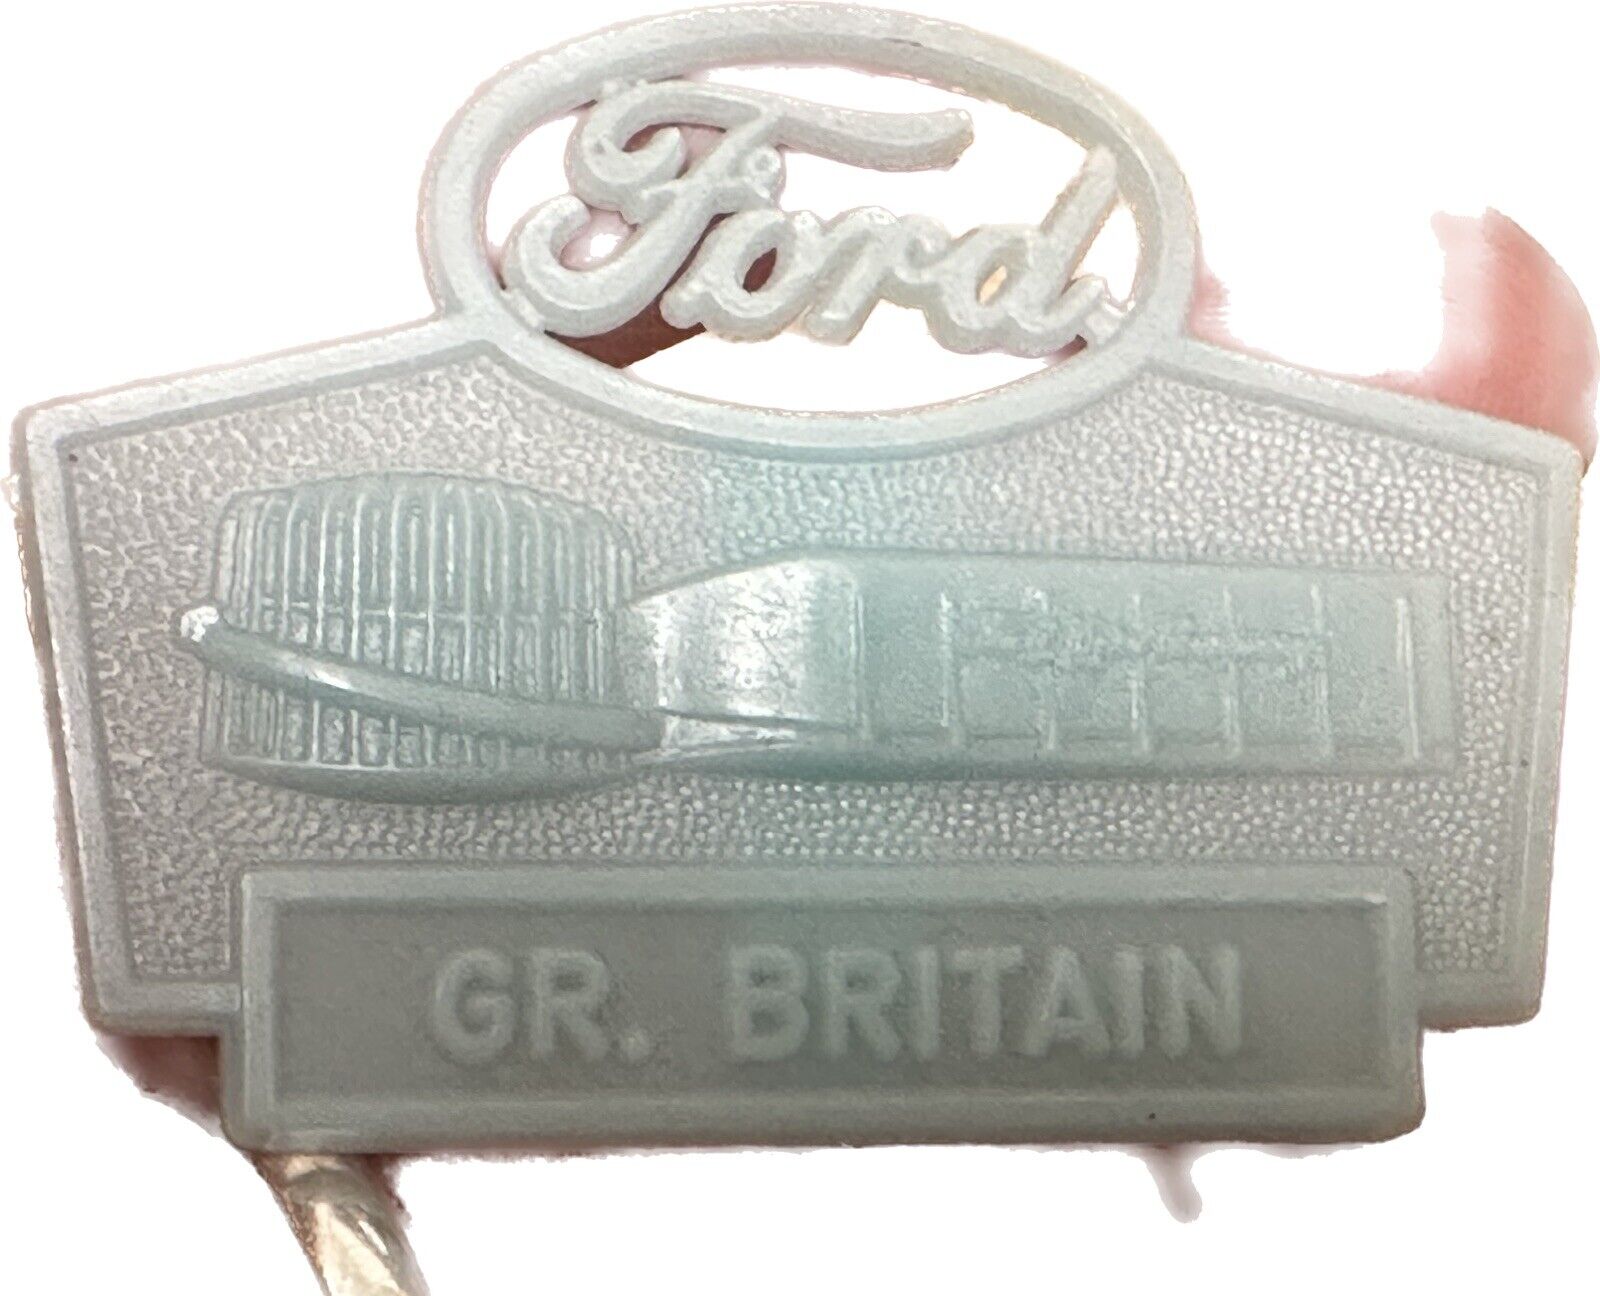 1964 Ford Great Britain Hard Plastic Badge Marker Vintage Advertising Car Auto